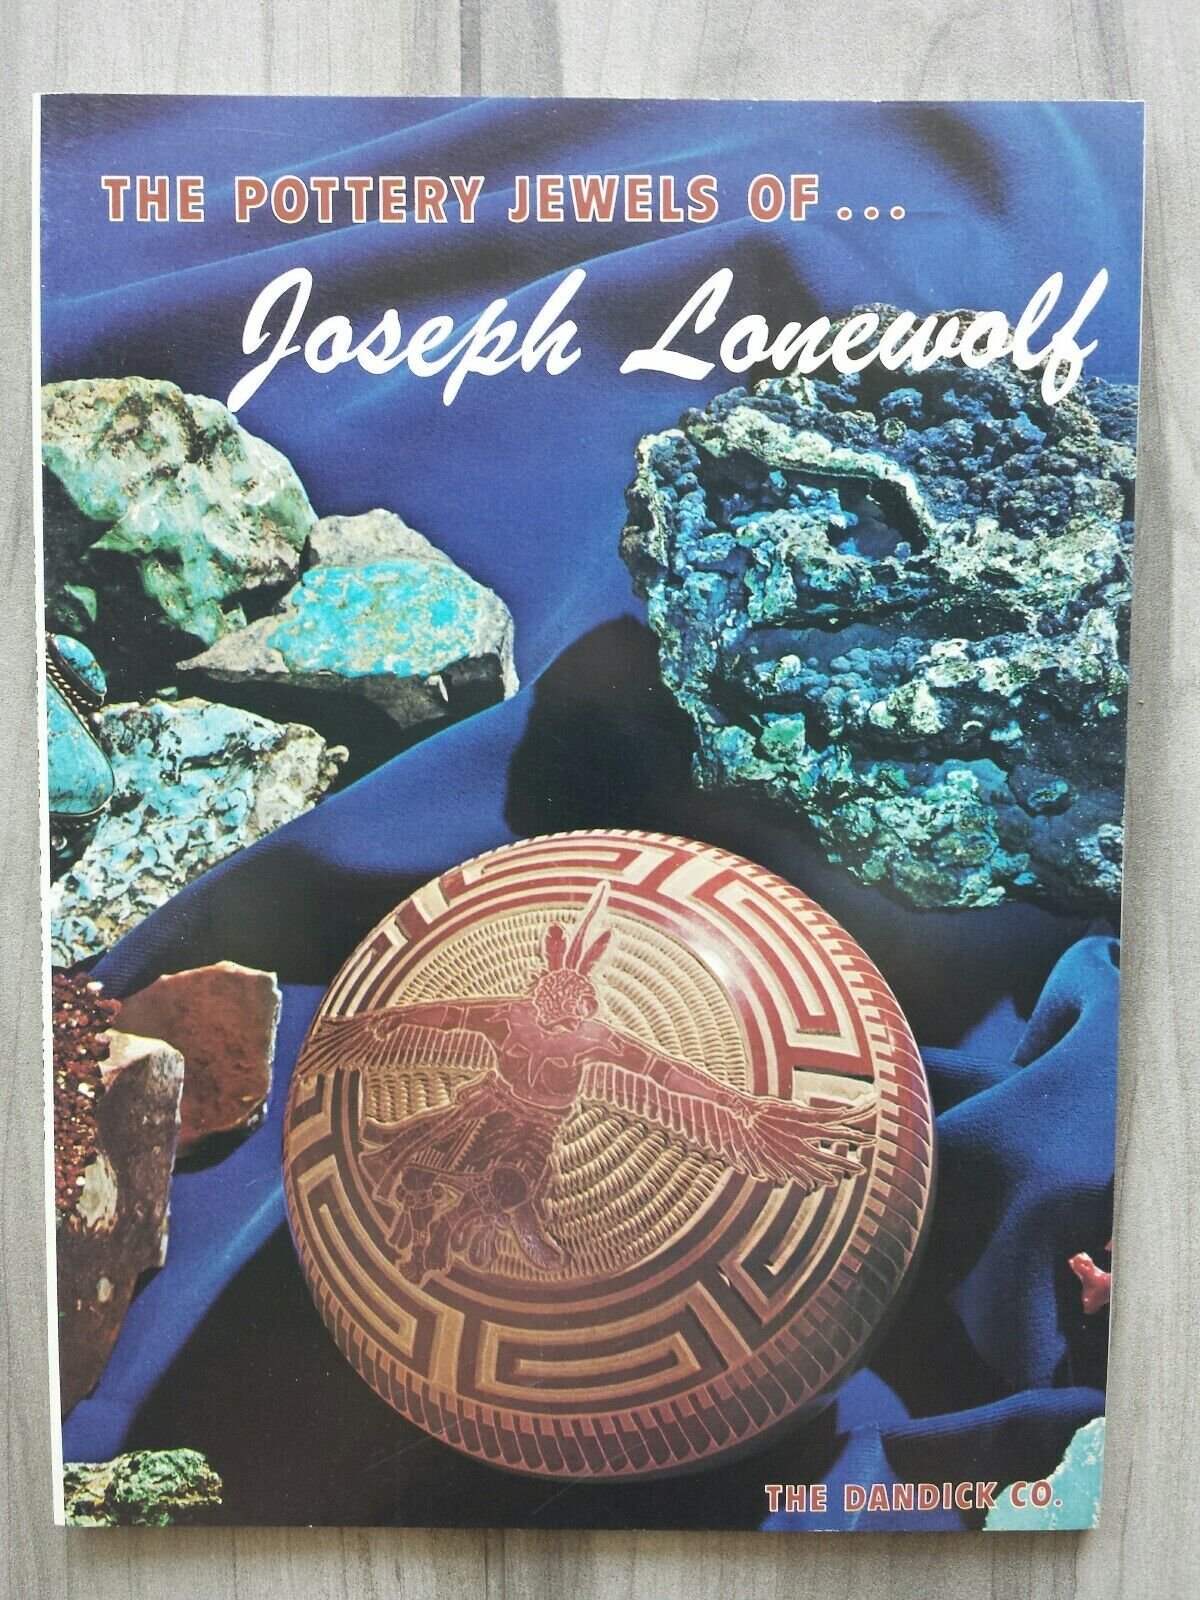 THE POTTERY JEWELS Book OF JOSEPH LONEWOLF  1975 CATALOG NEW FIRST EDITION  Book